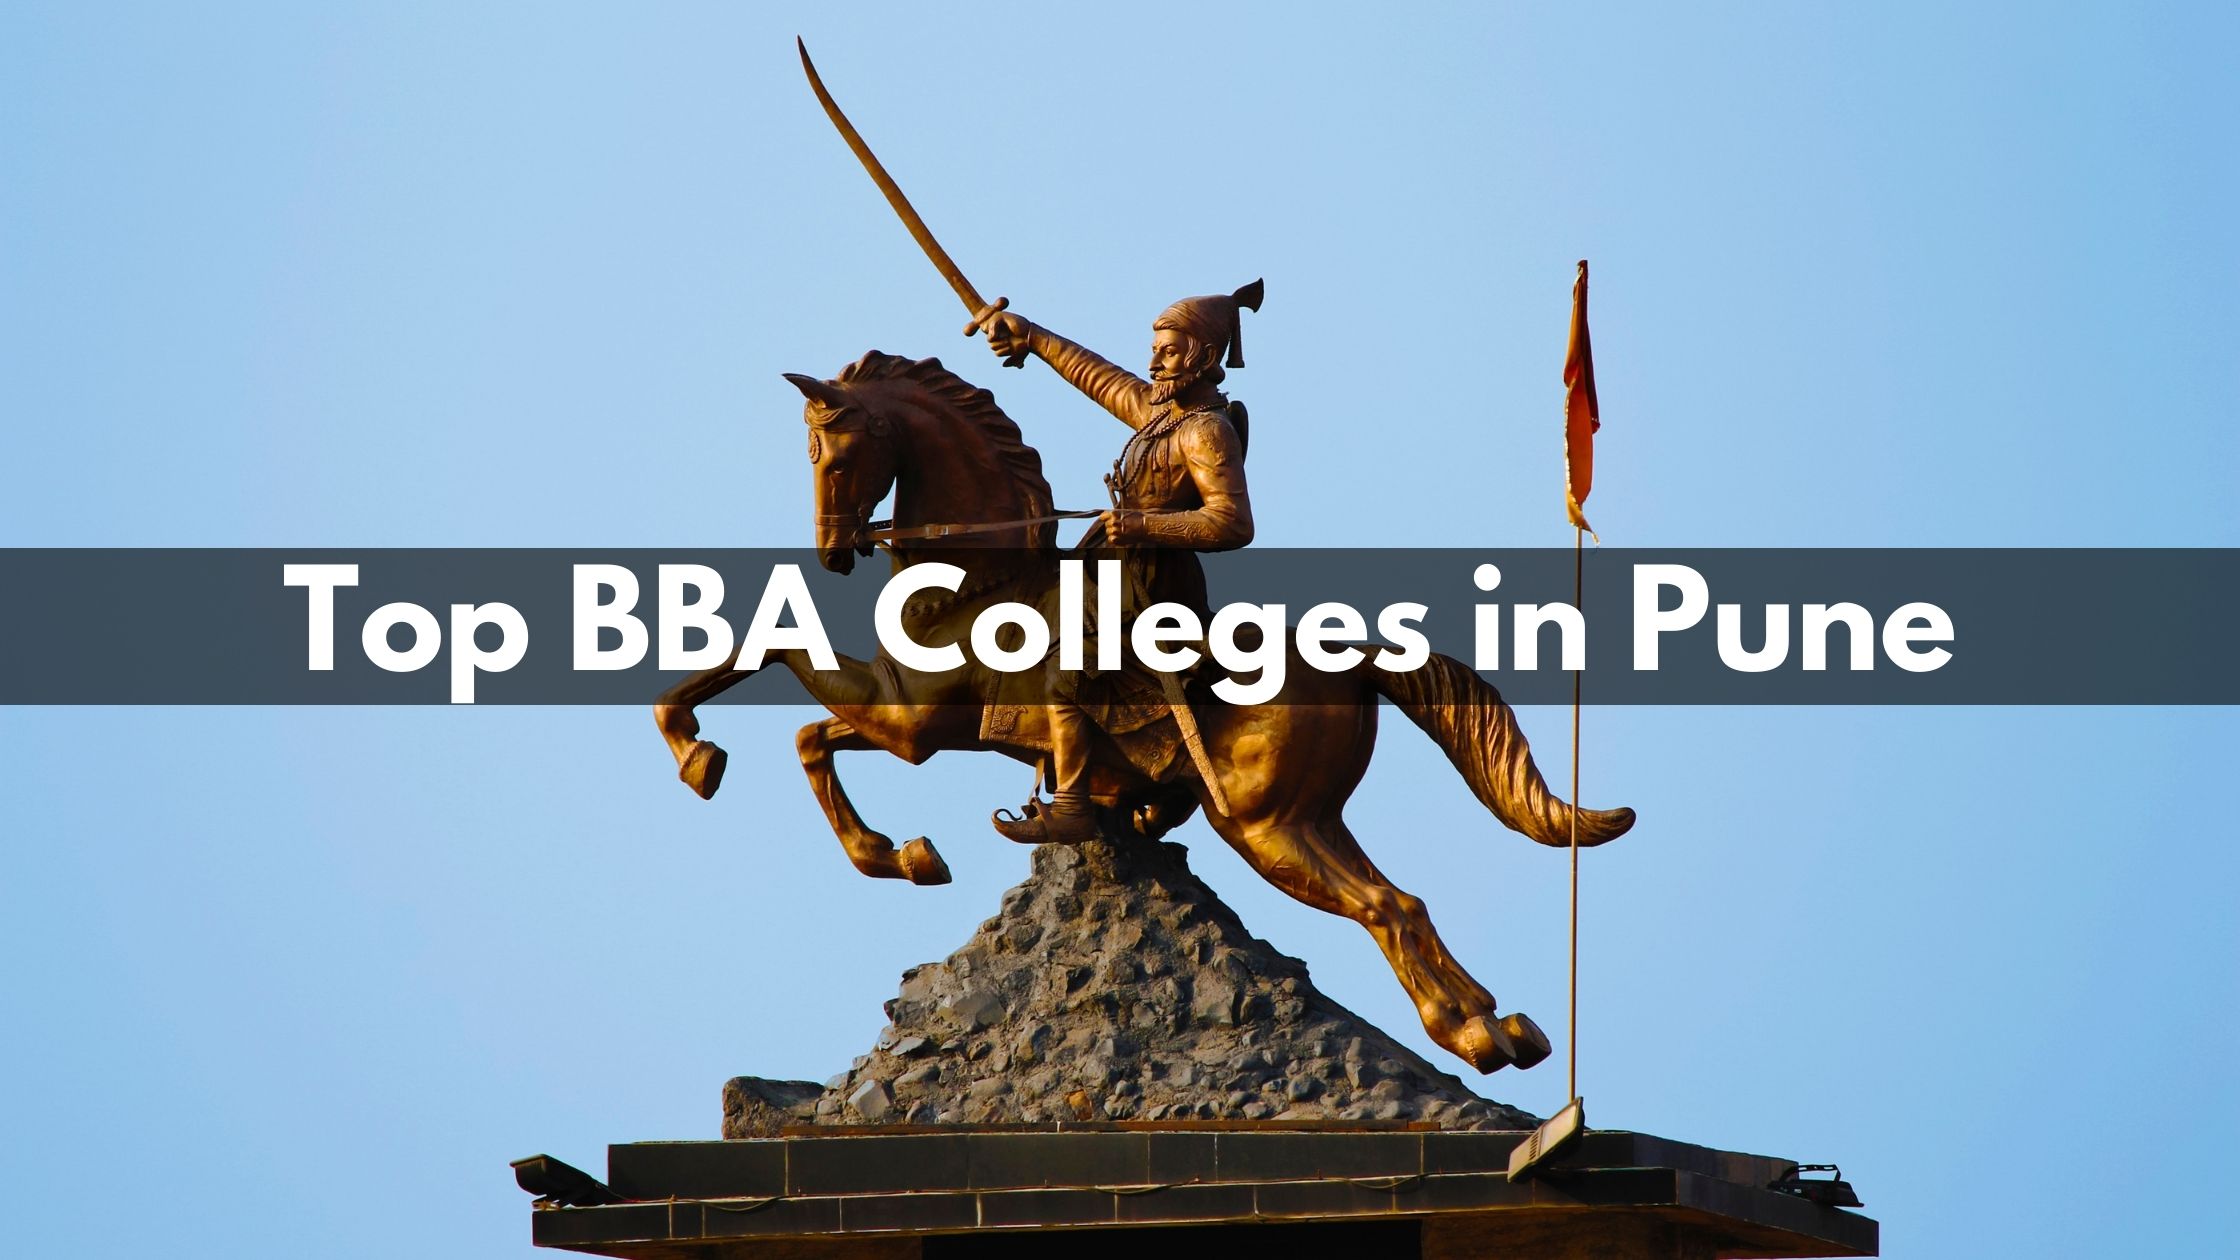 bba colleges in pune